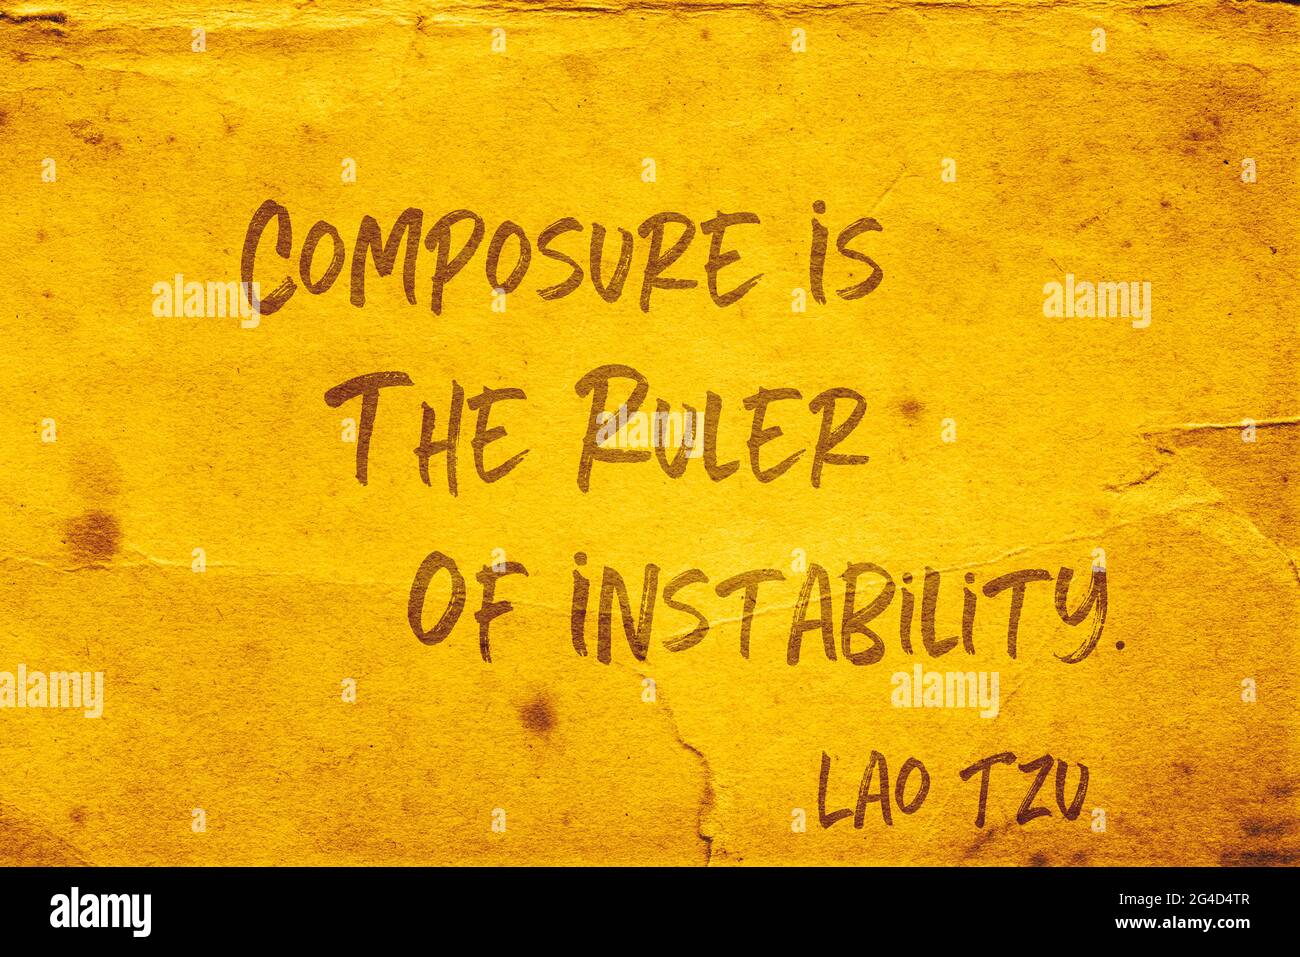 Composure is the ruler of instability - ancient Chinese philosopher Lao Tzu quote printed on grunge yellow paper Stock Photo